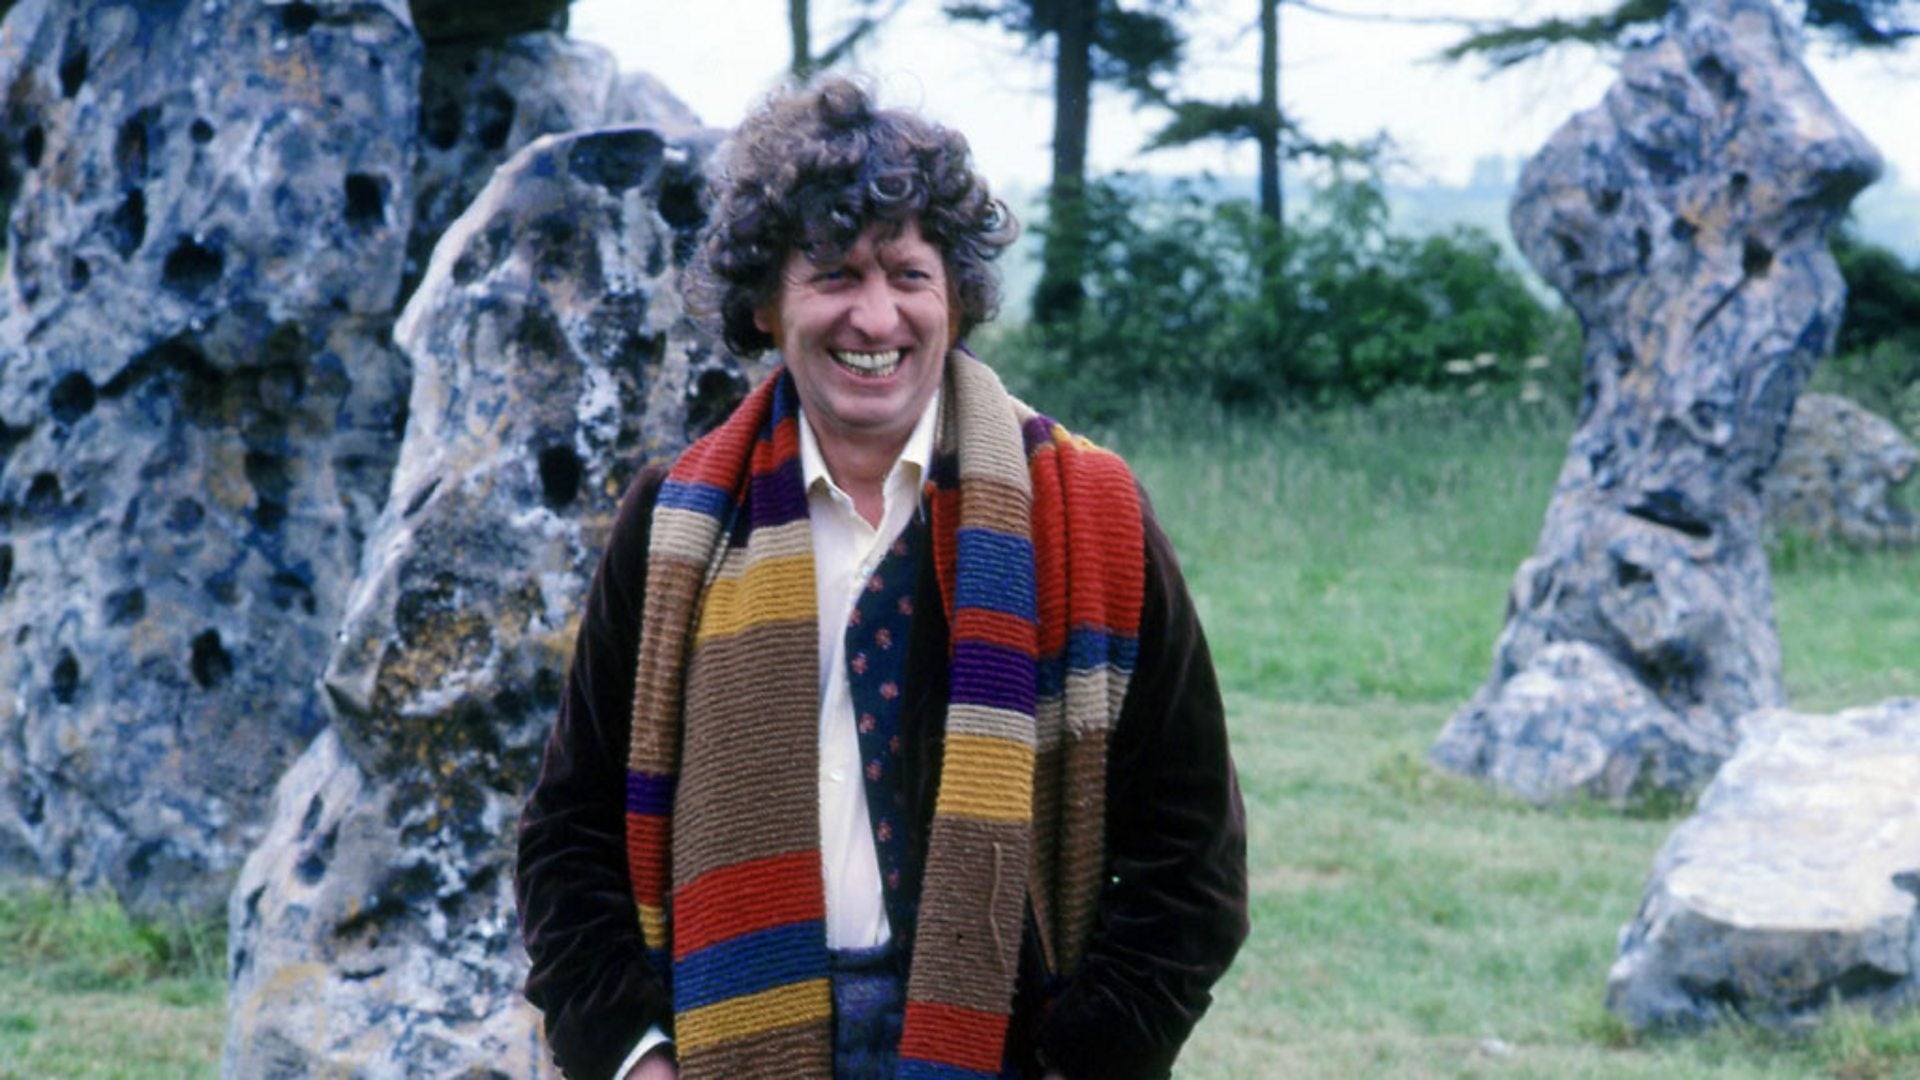 Image of Tom Baker as the Doctor